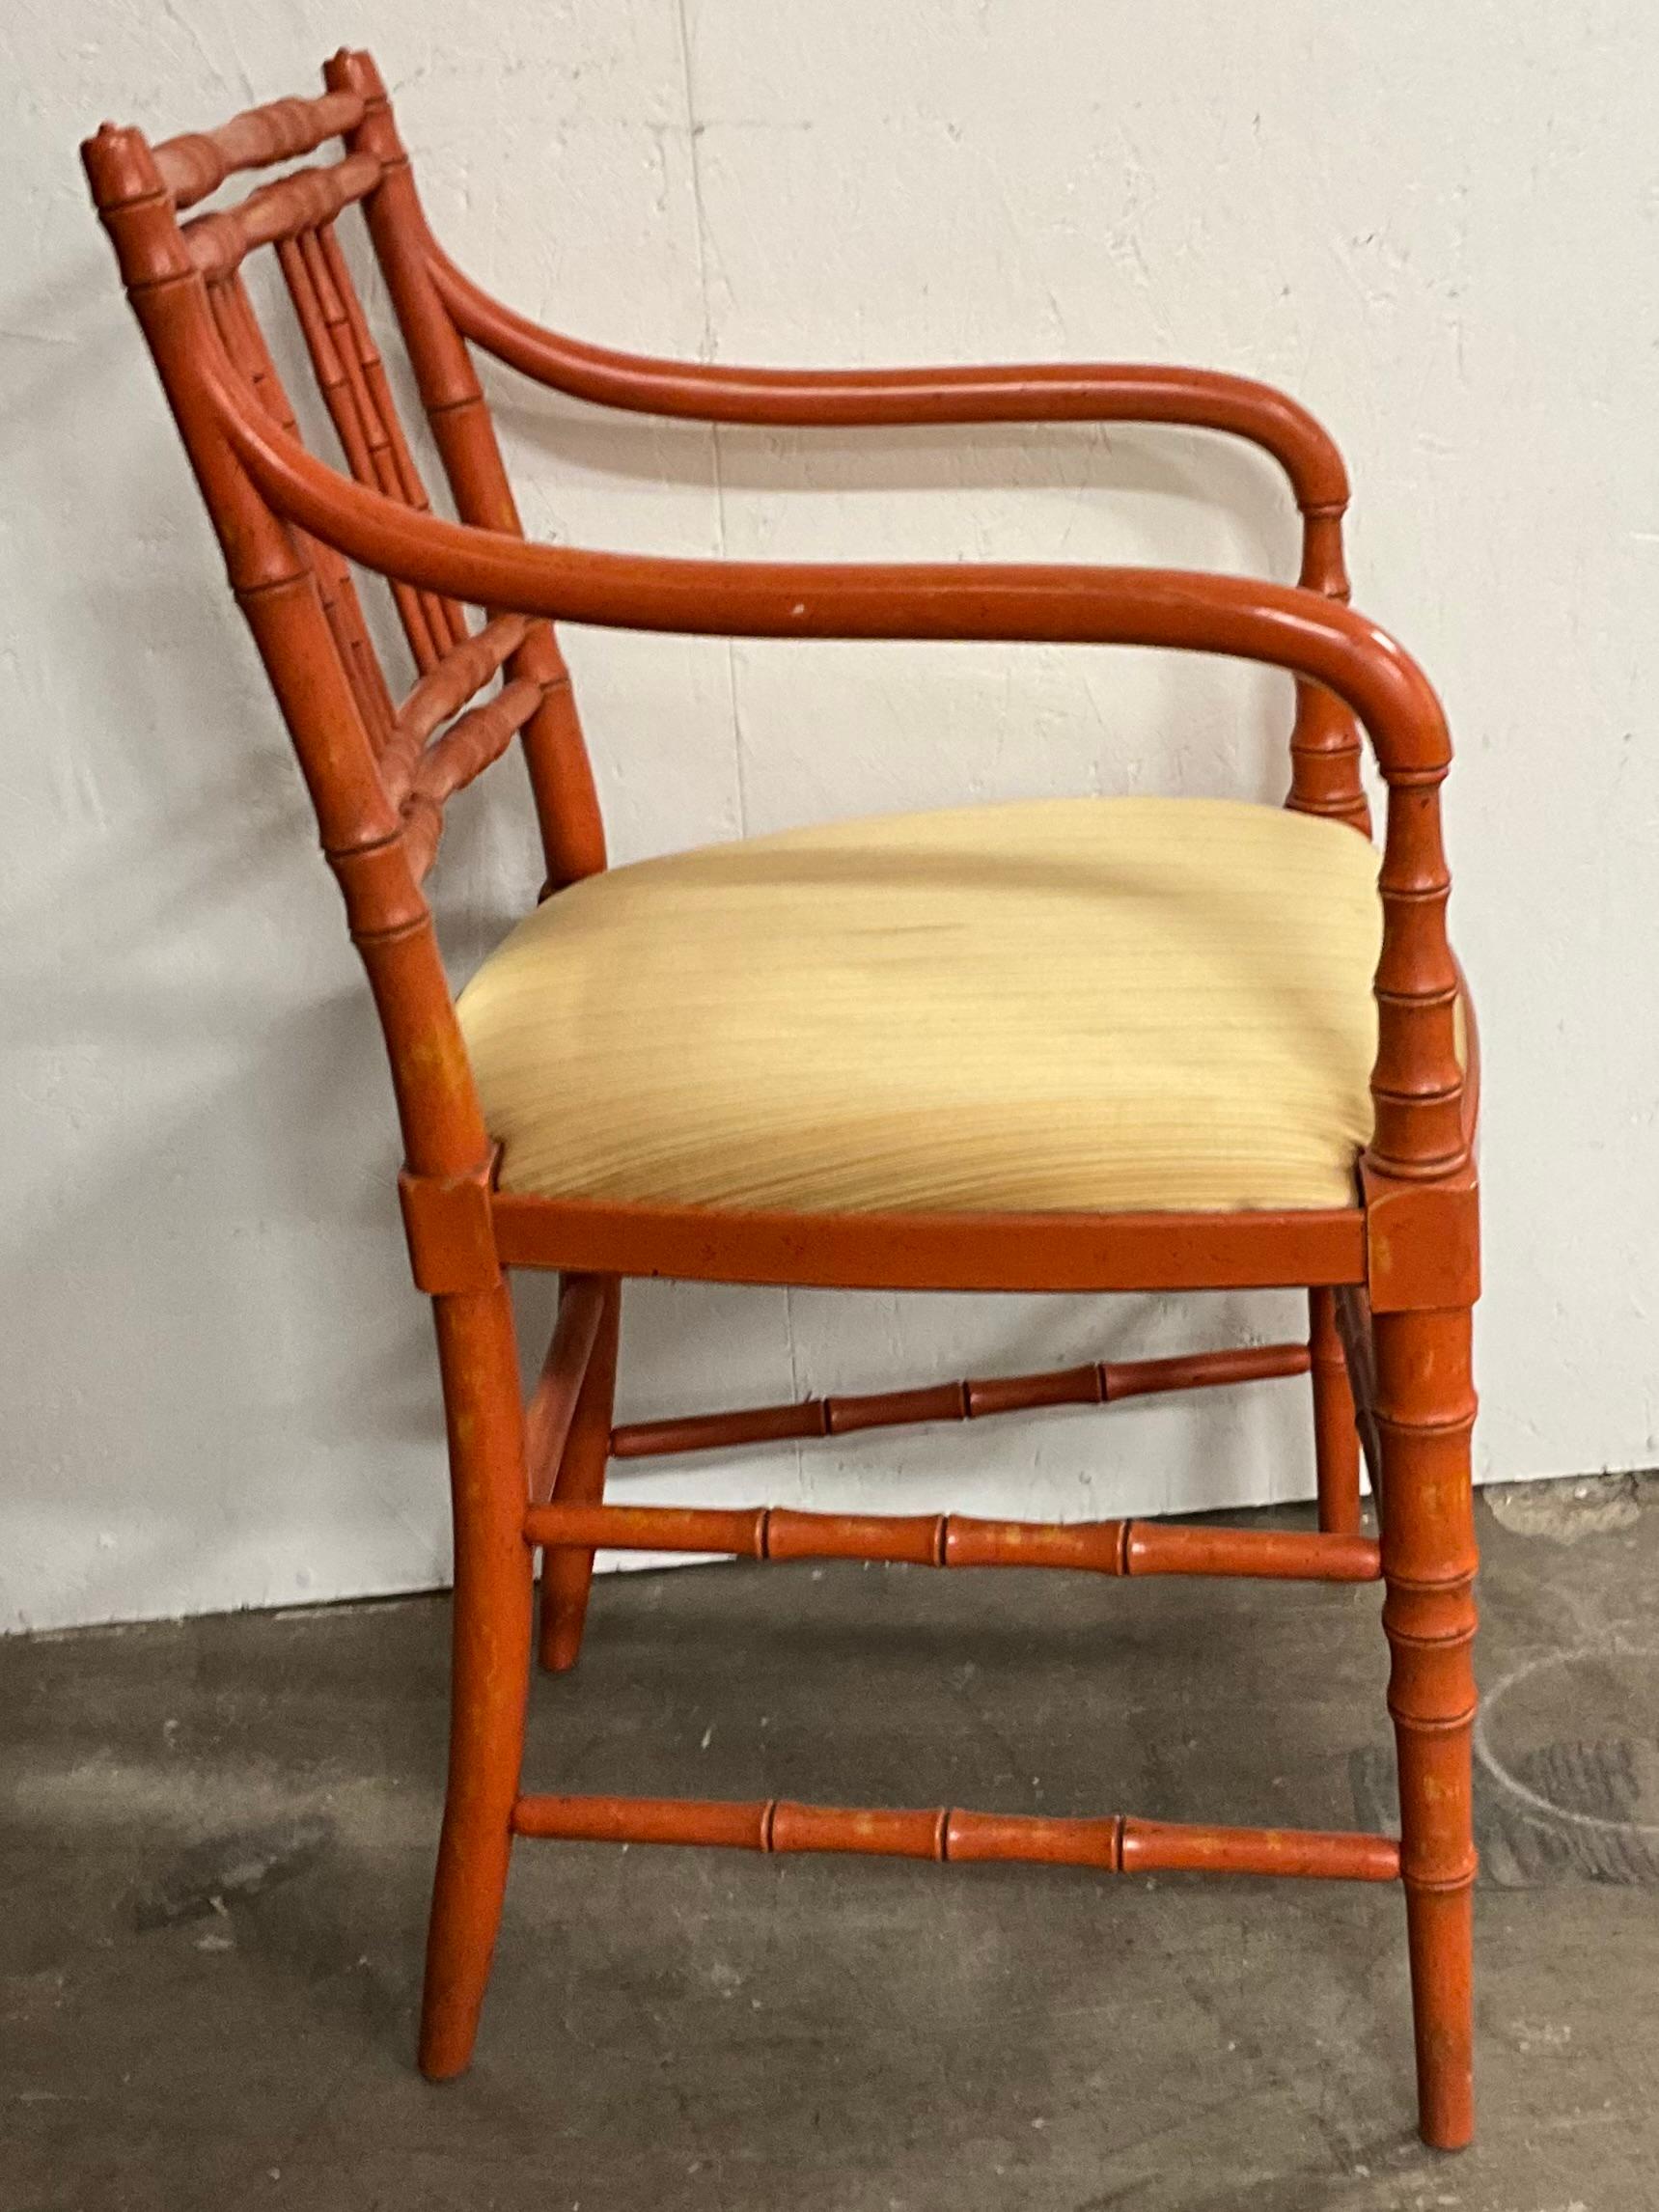 Aesthetic Movement 1950s French Style Orange Painted Faux Bamboo Bergere Chairs - Pair For Sale